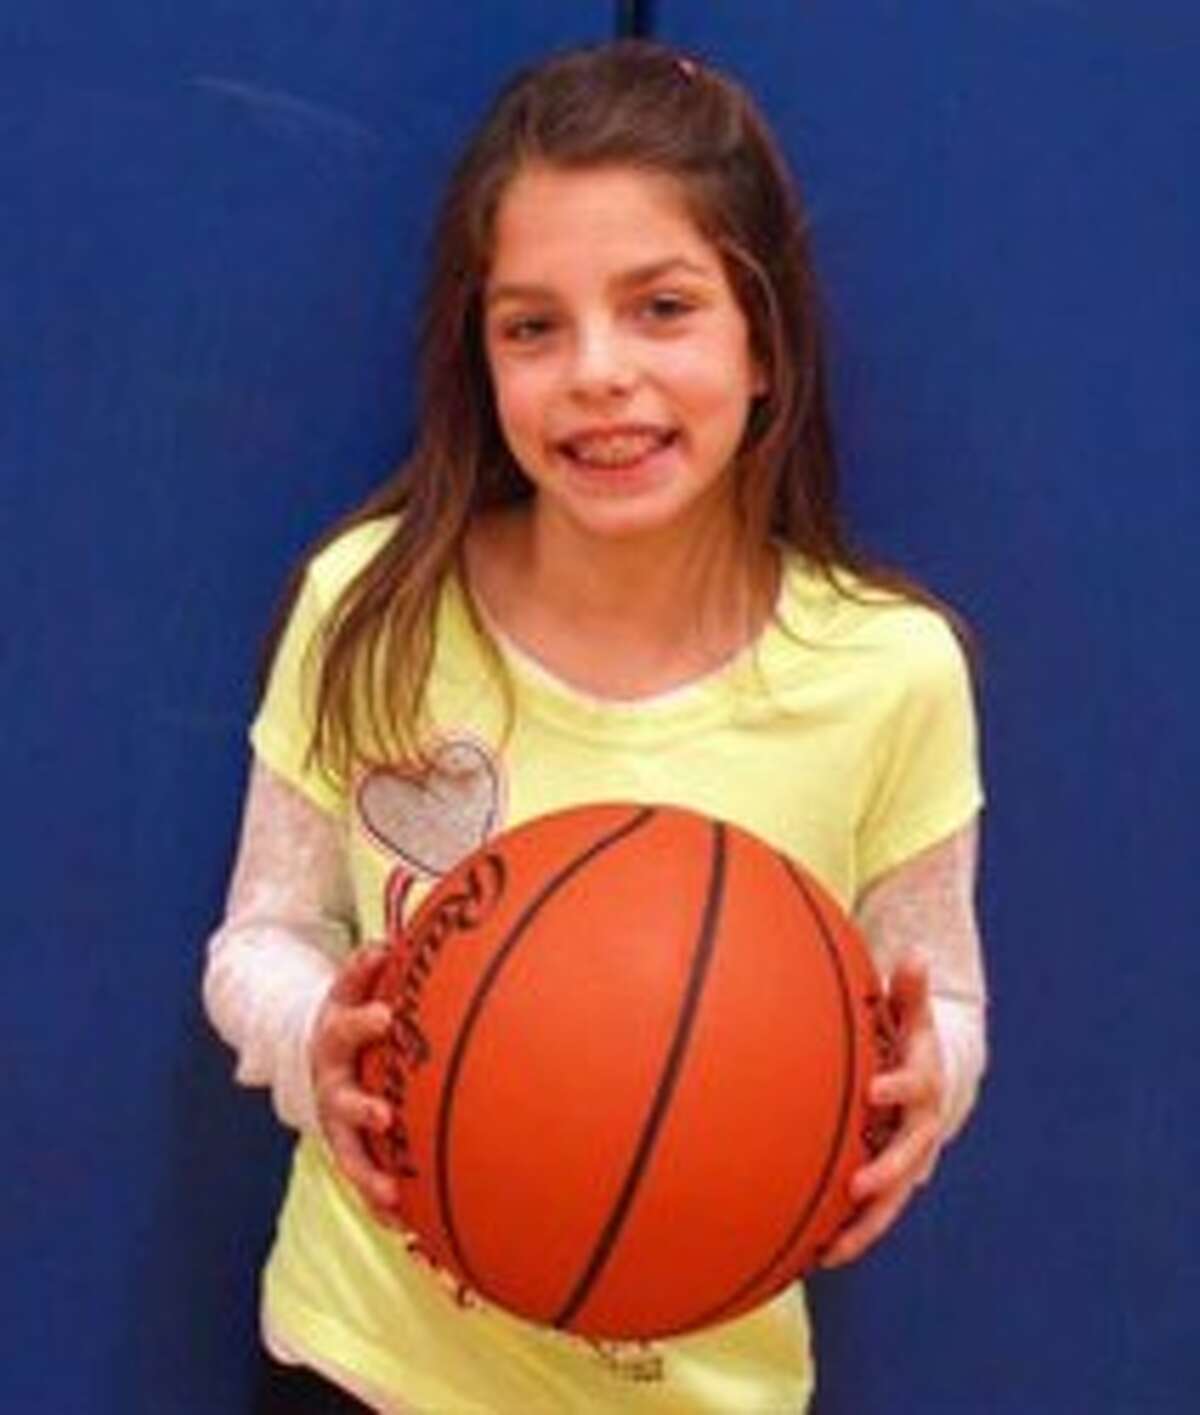 Sara Bromley won the Knights of Columbus Free Throw state championship in the girls 9-year-old division.